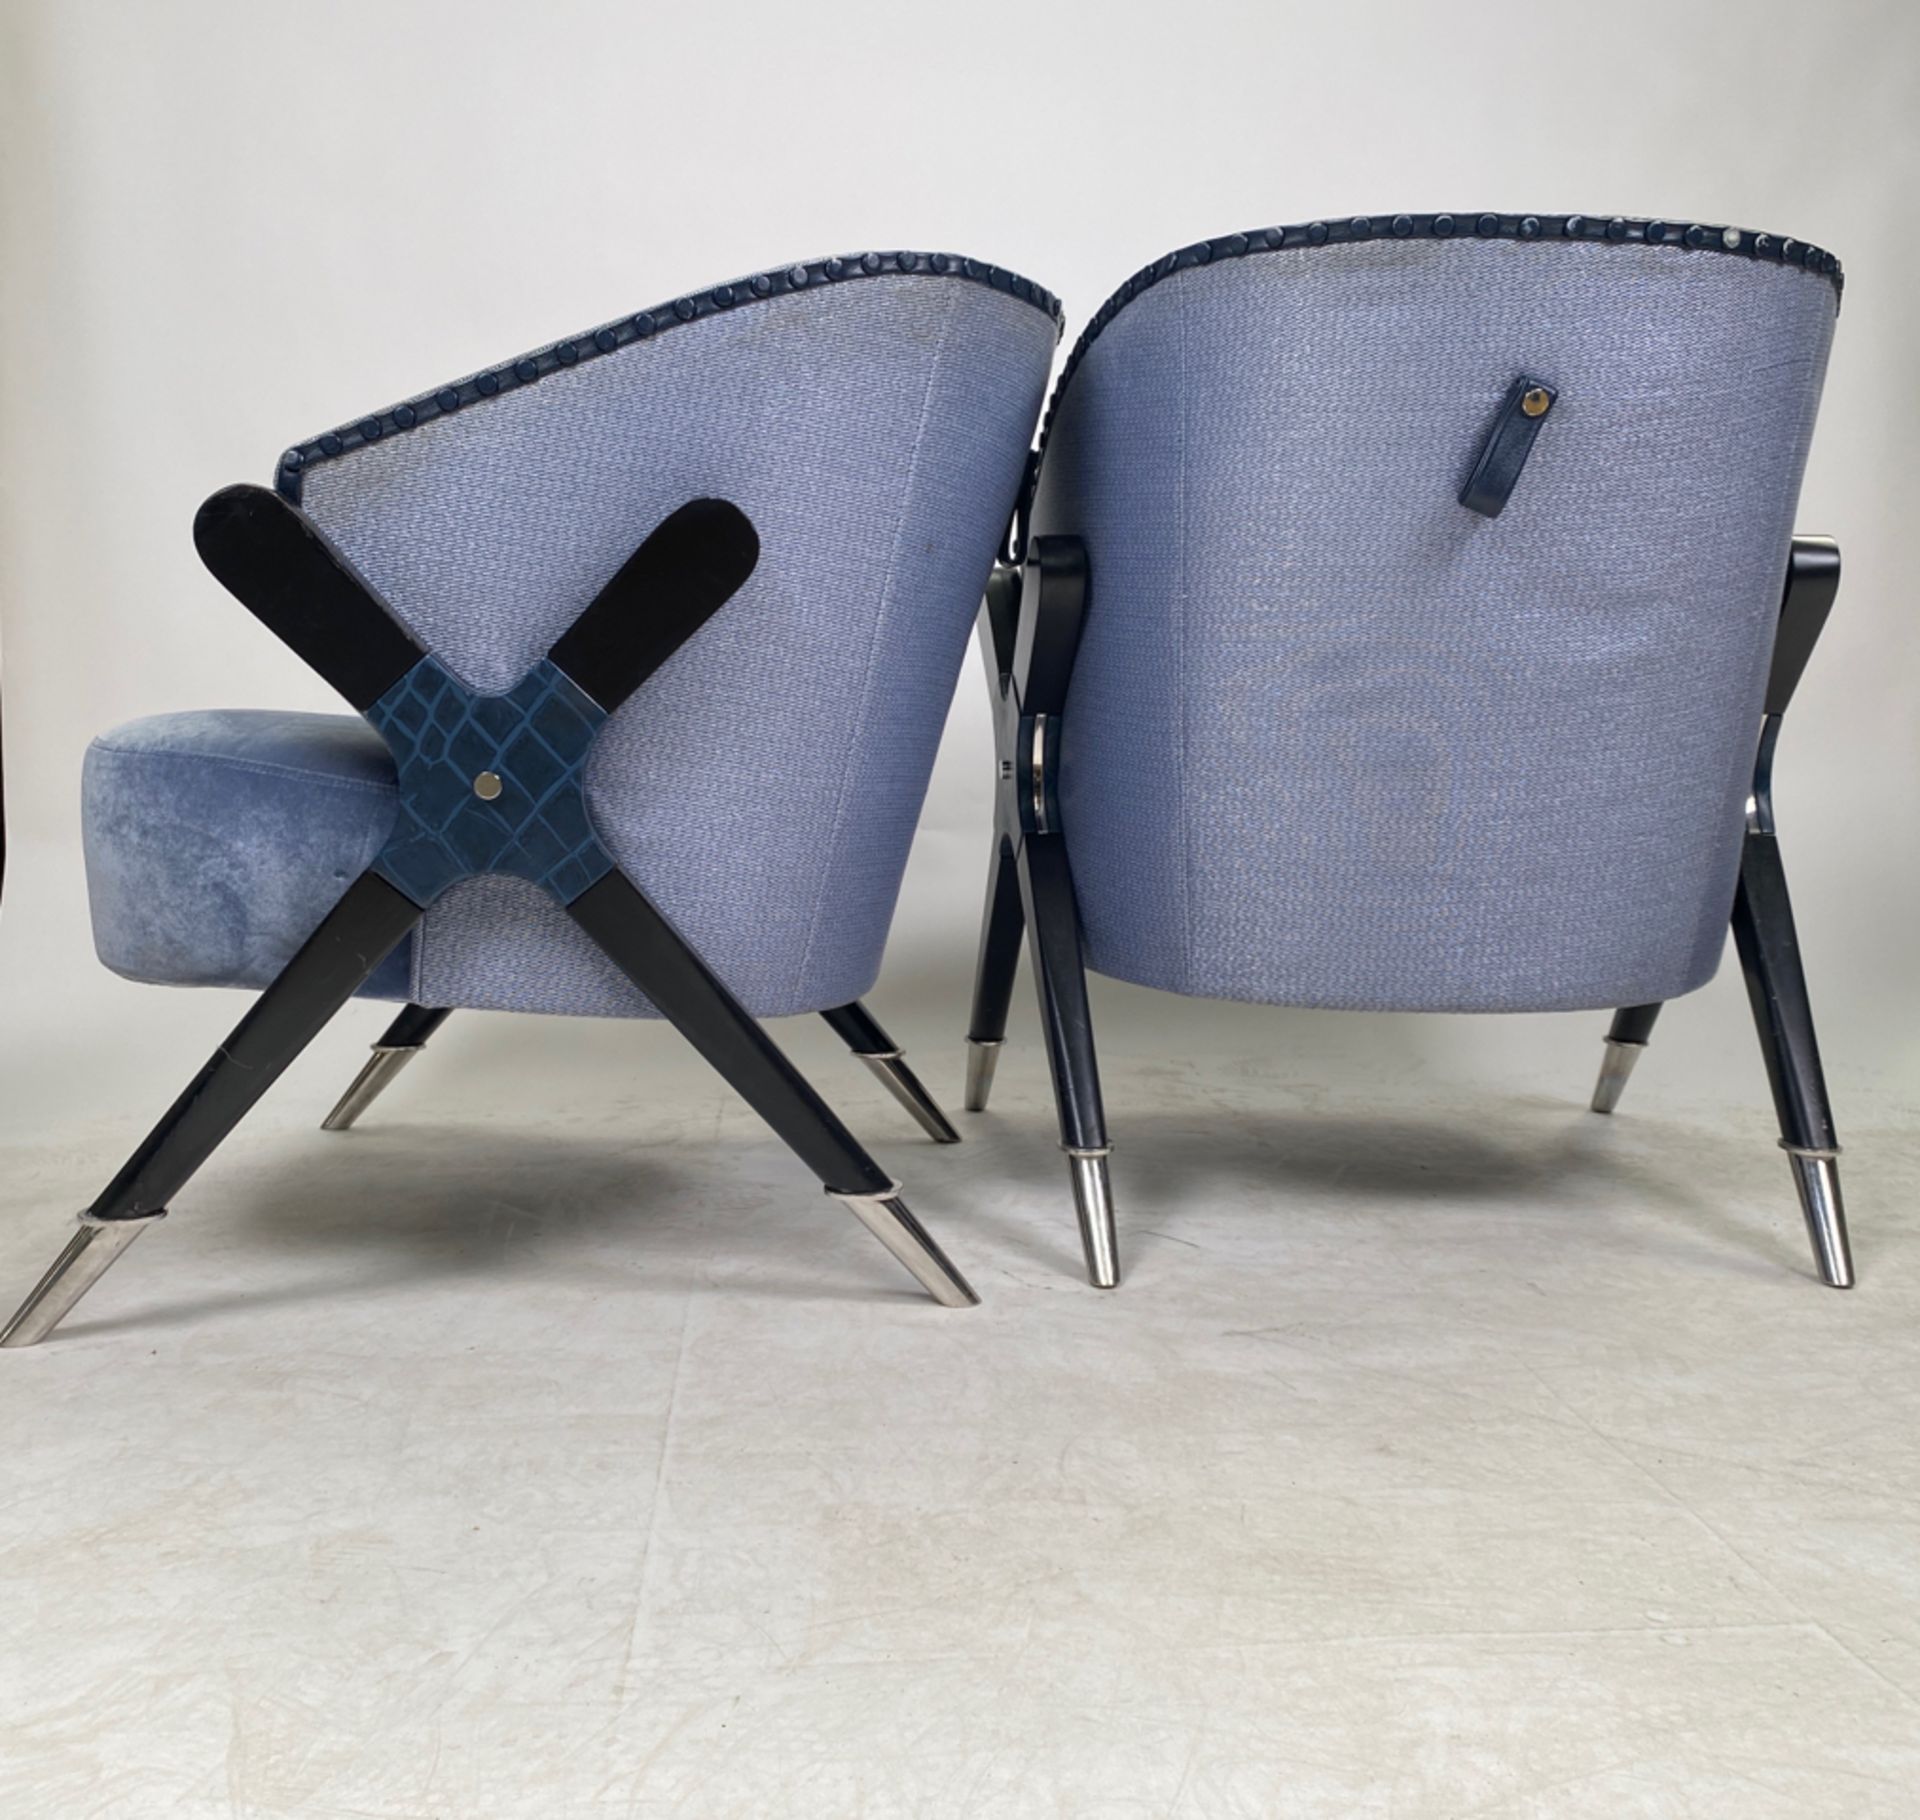 Bespoke Pair of Ben Whistler Chairs Commissioned by Robert Angell Design for The Berkeley Blue Bar - Bild 3 aus 5